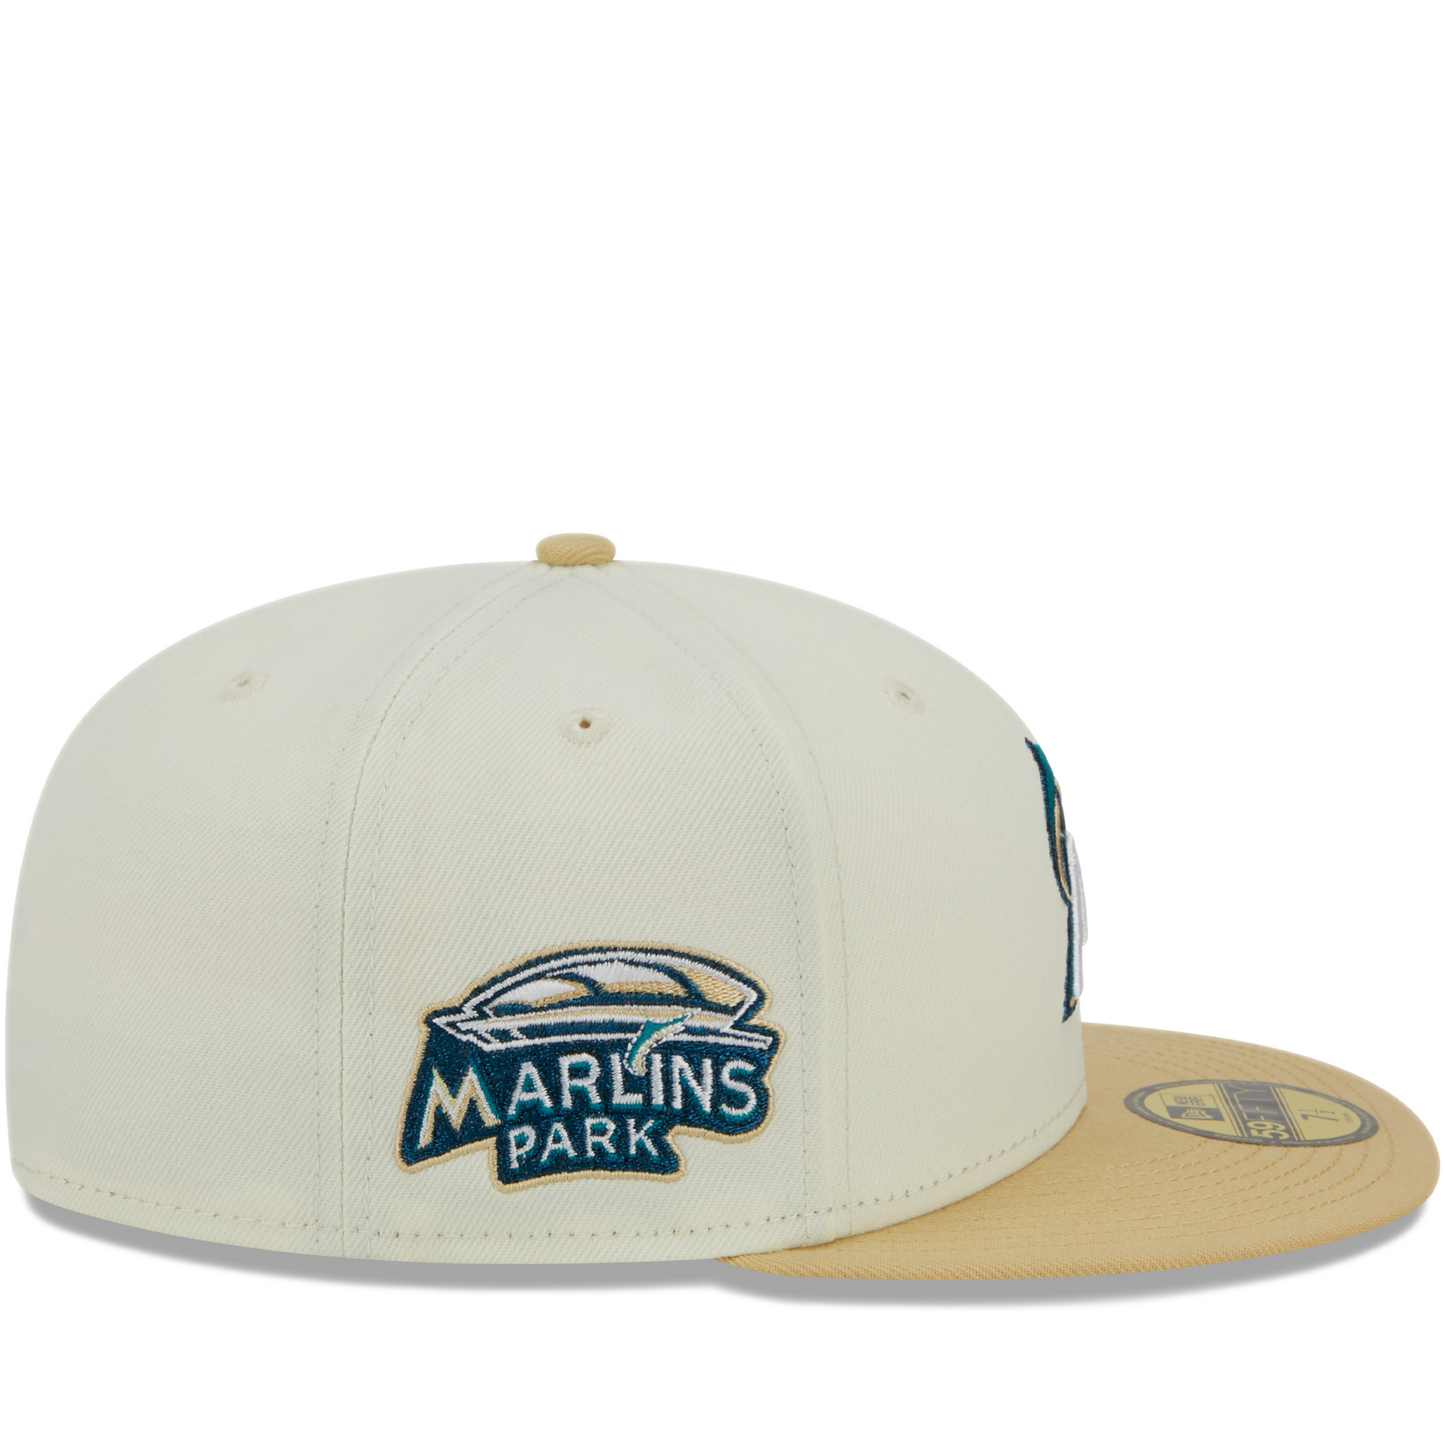 New Era Miami Marlins City Icon 59FIFTY Fitted Hat - White/ Cream